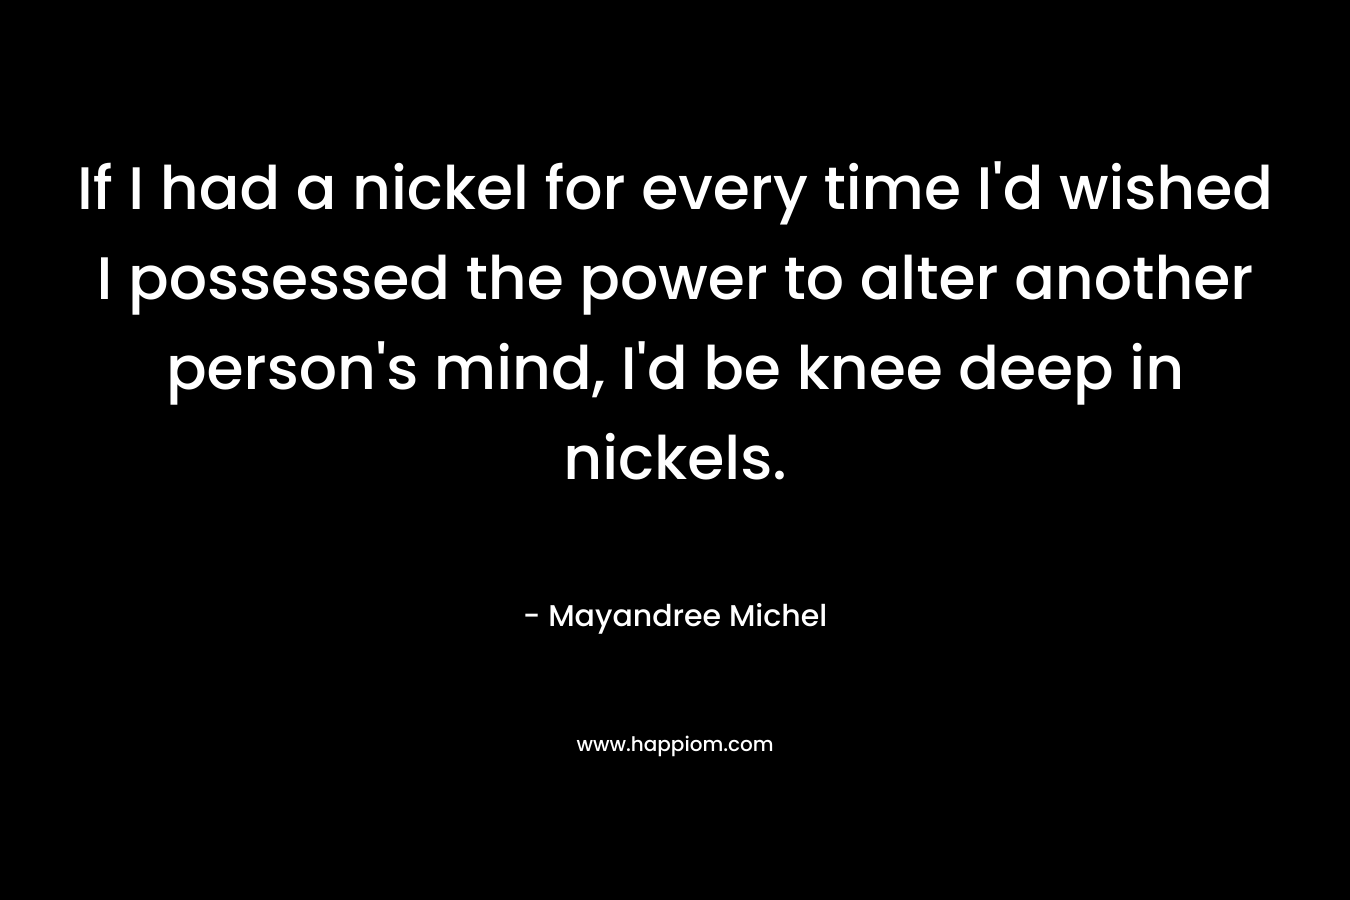 If I had a nickel for every time I’d wished I possessed the power to alter another person’s mind, I’d be knee deep in nickels. – Mayandree Michel